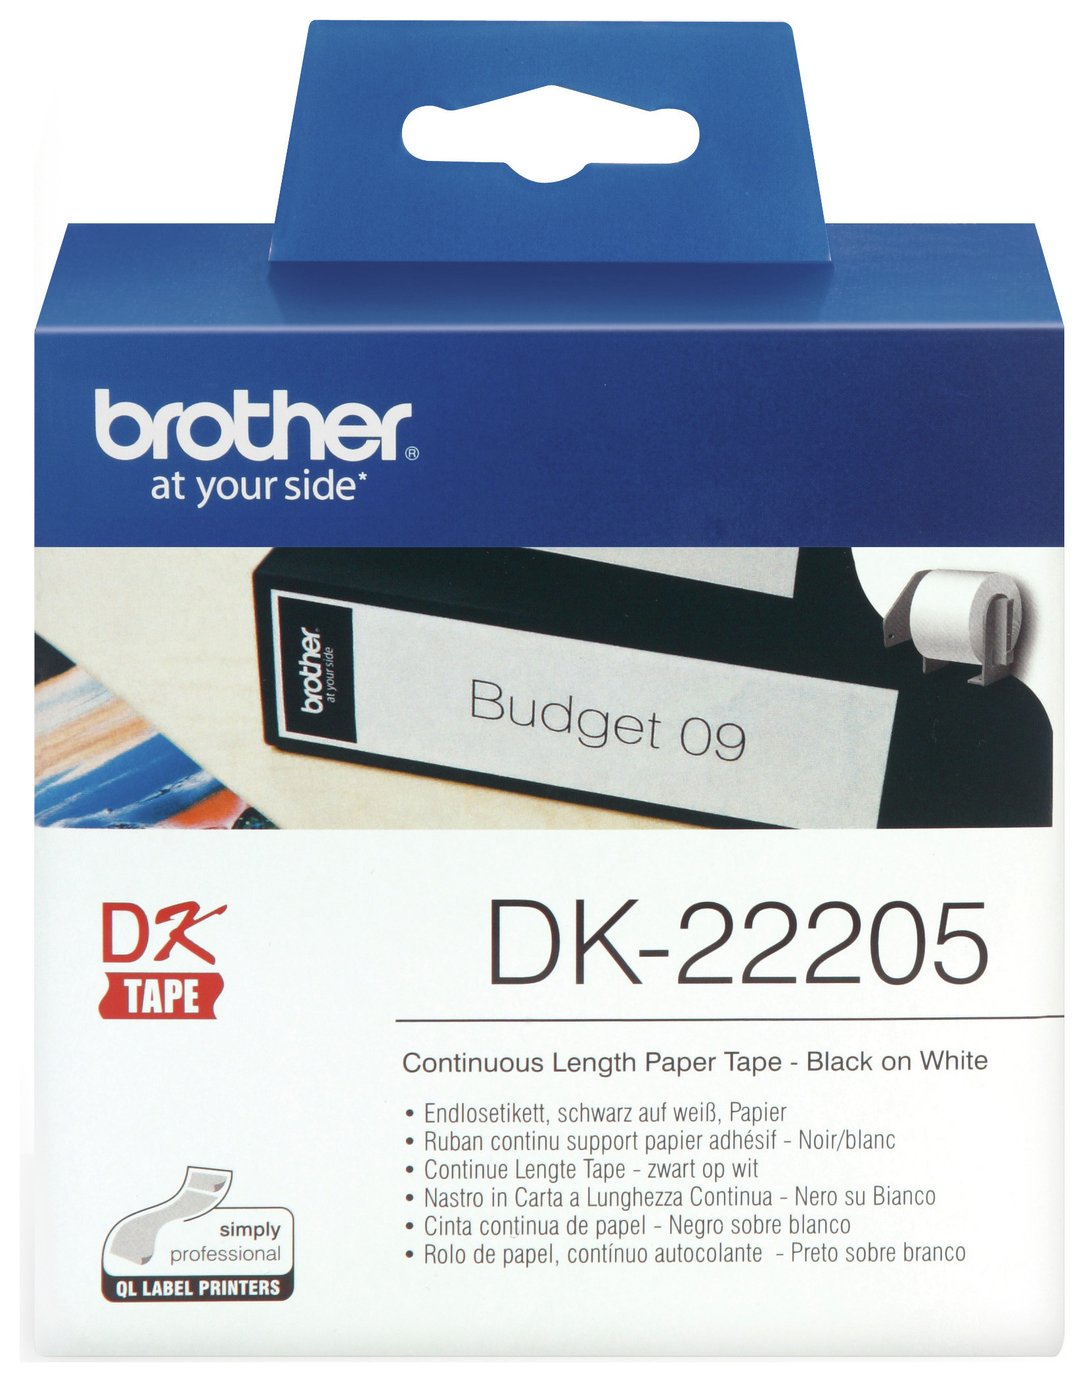 Brother DK - 22205 Labelling Tape